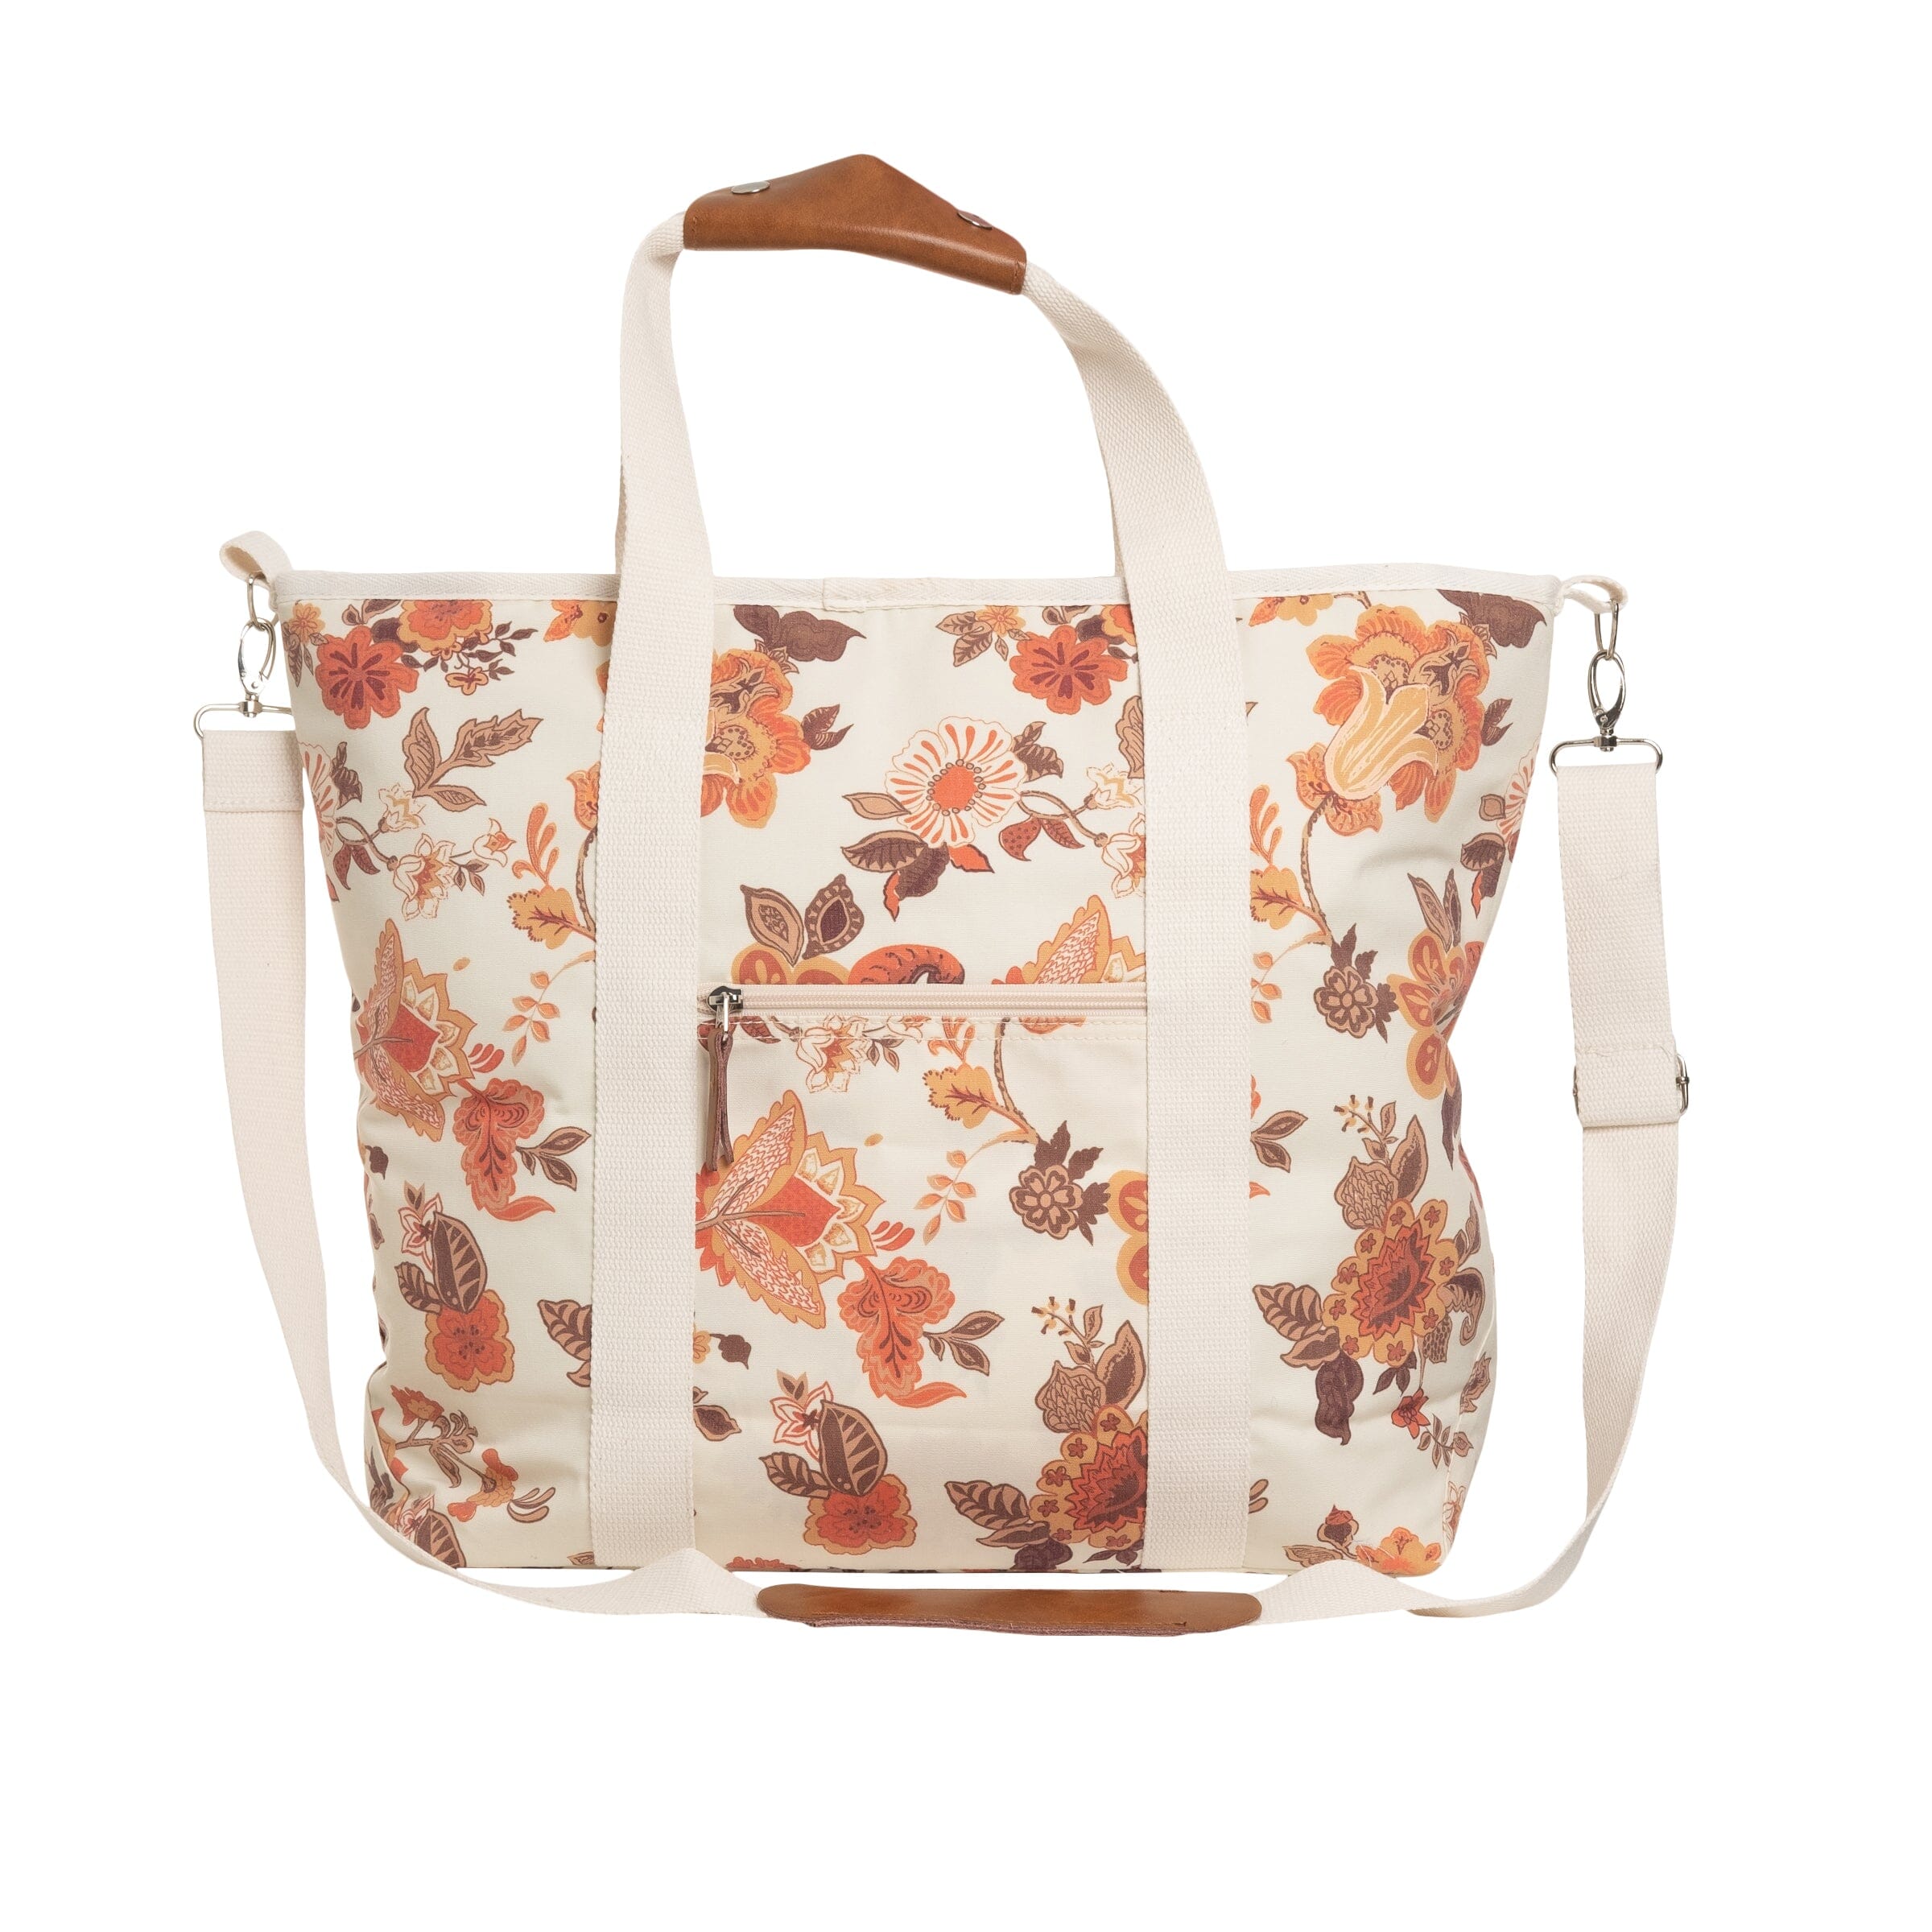 The Cooler Tote Bag - Paisley Bay Cooler Tote Business & Pleasure Co 